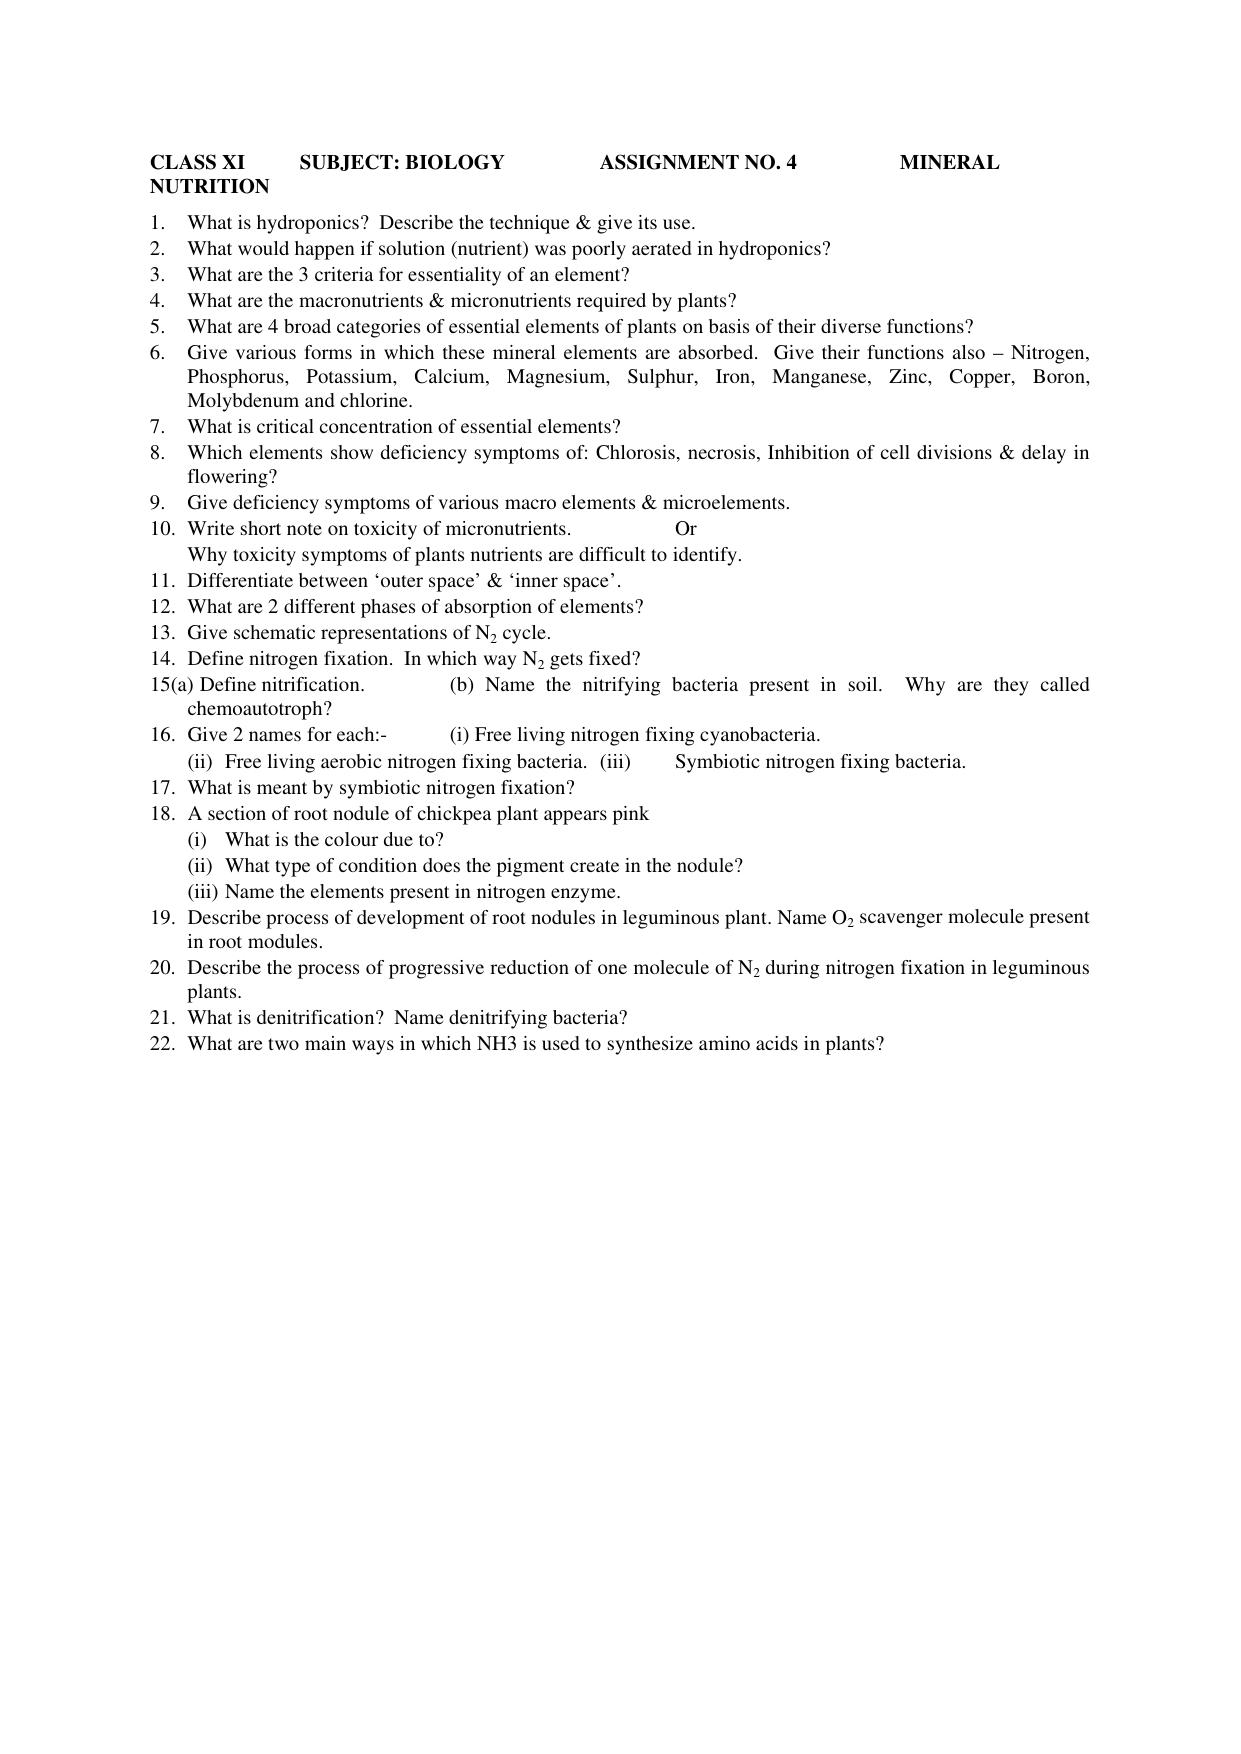 CBSE Worksheets for Class 11 Biology Assignment 4 - Page 1